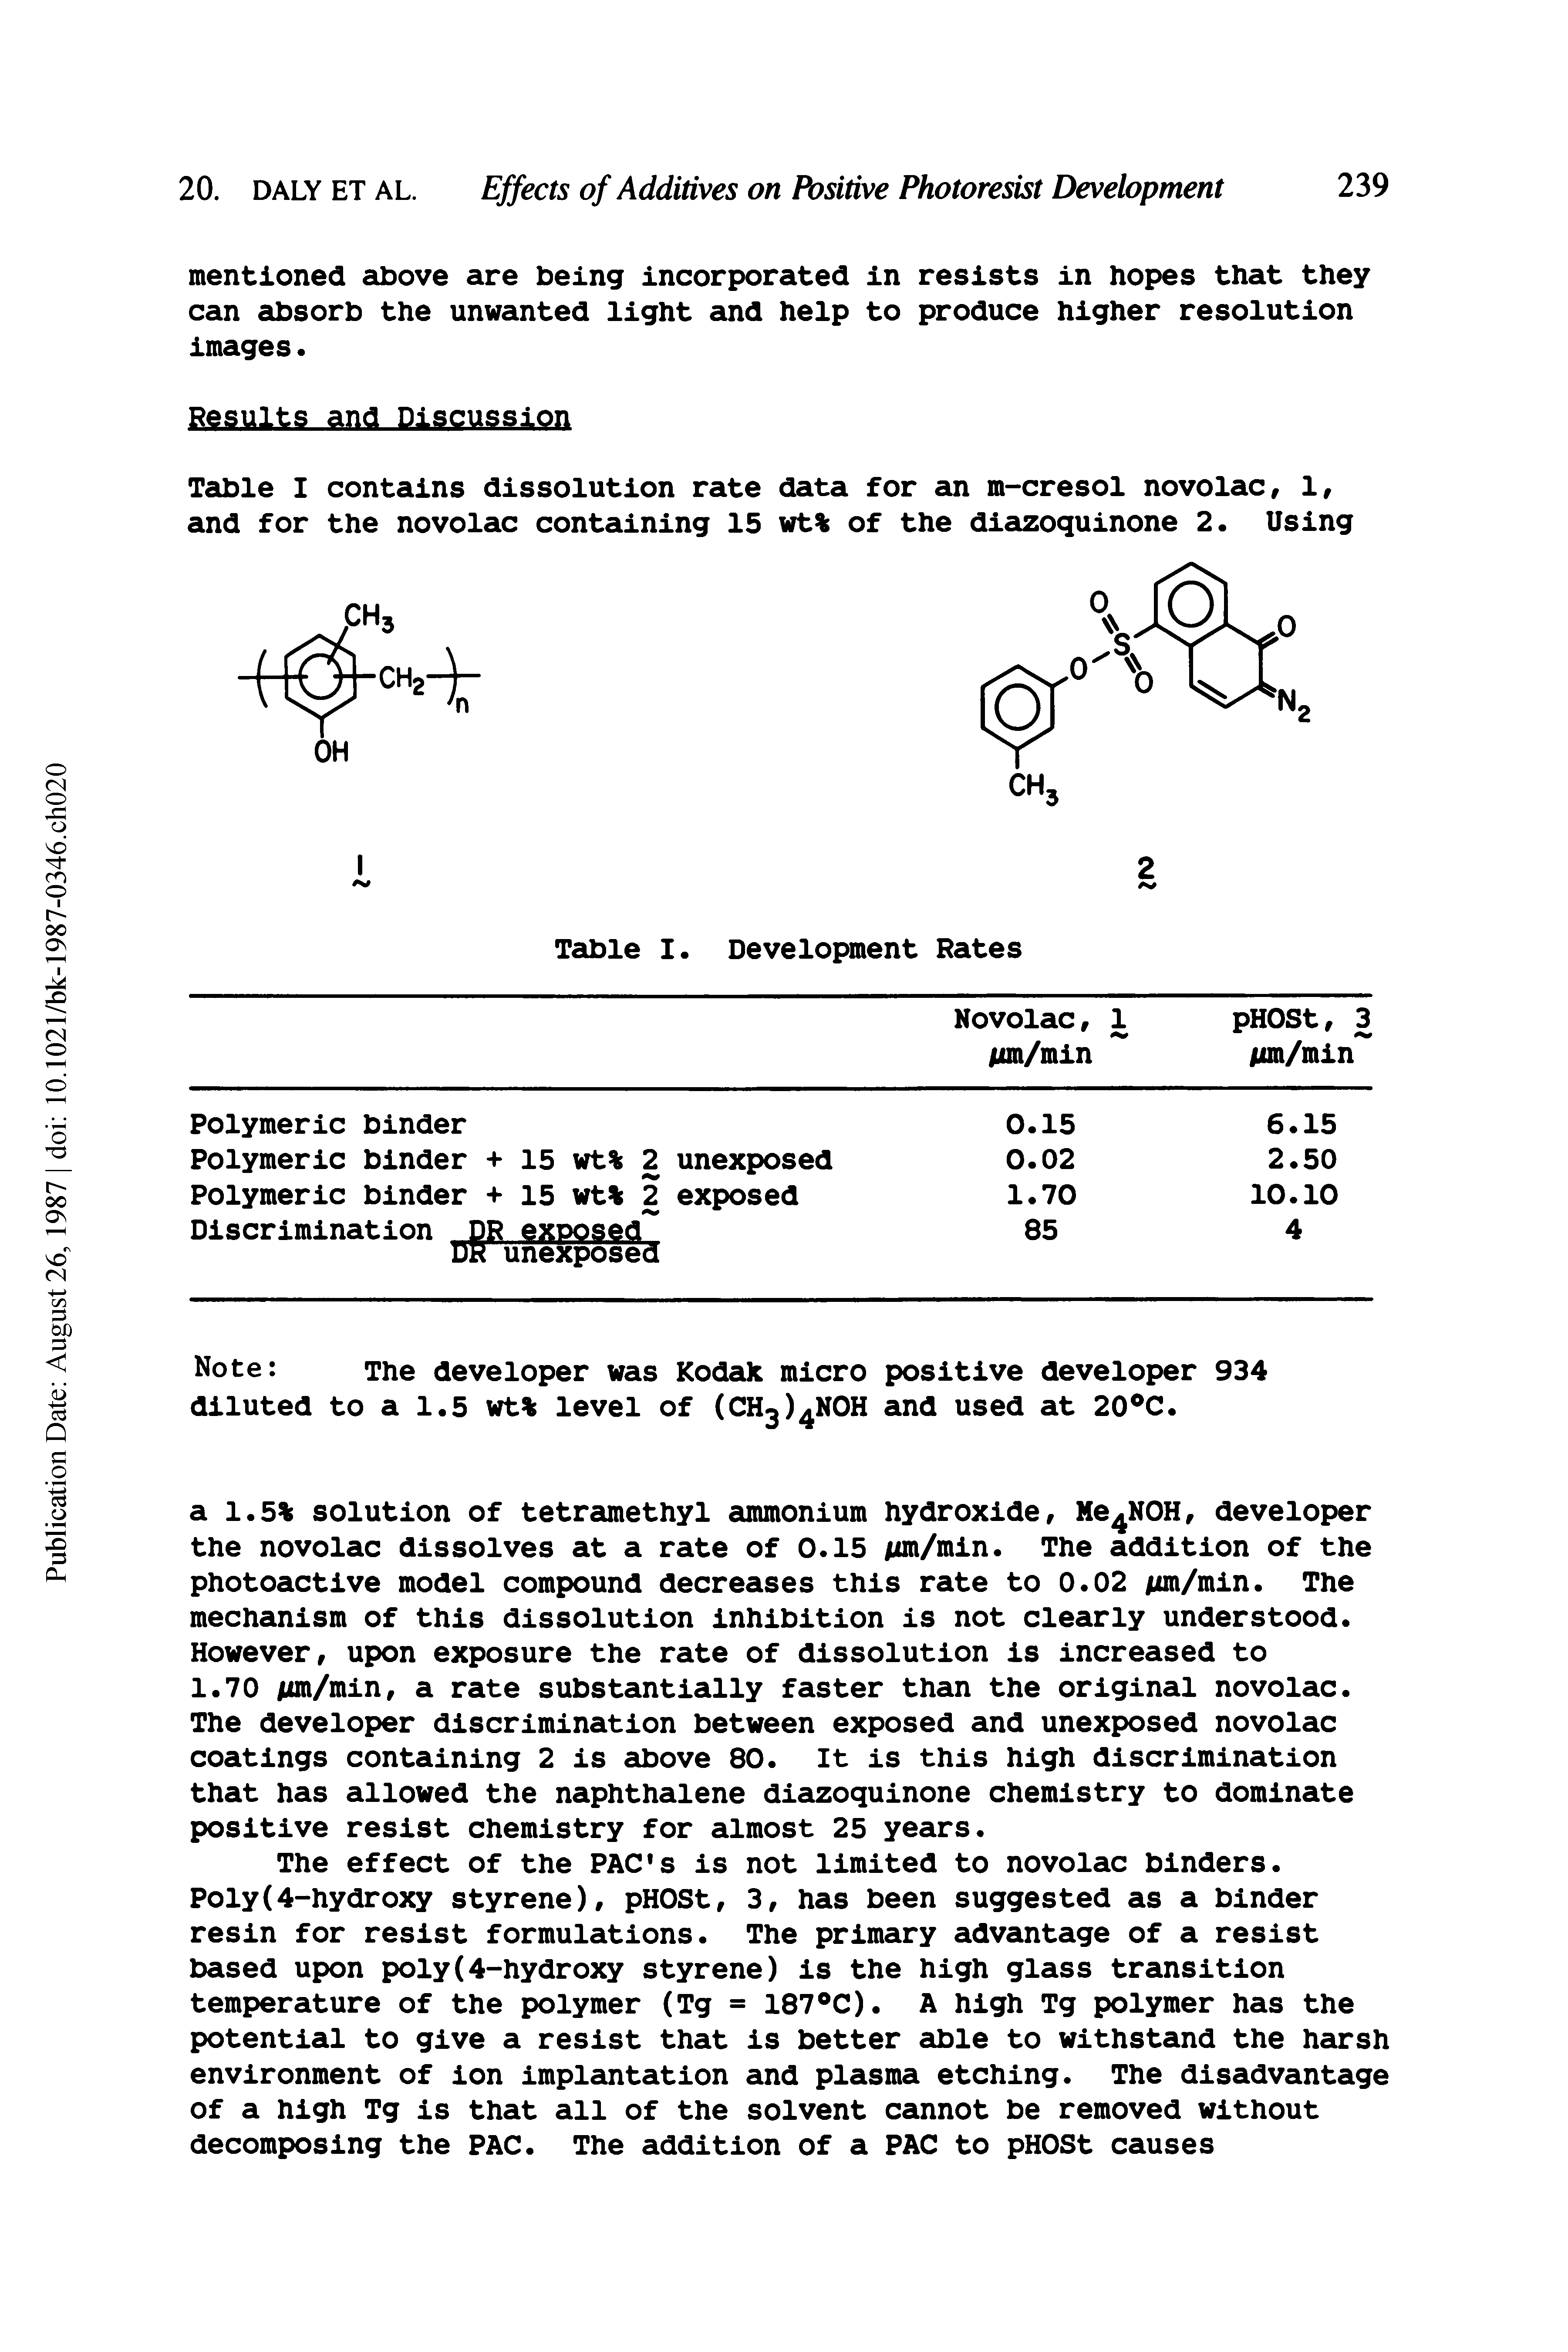 Table I contains dissolution rate data for an m-cresol novolac, 1, and for the novolac containing 15 wt% of the dicizoquinone 2. Using...